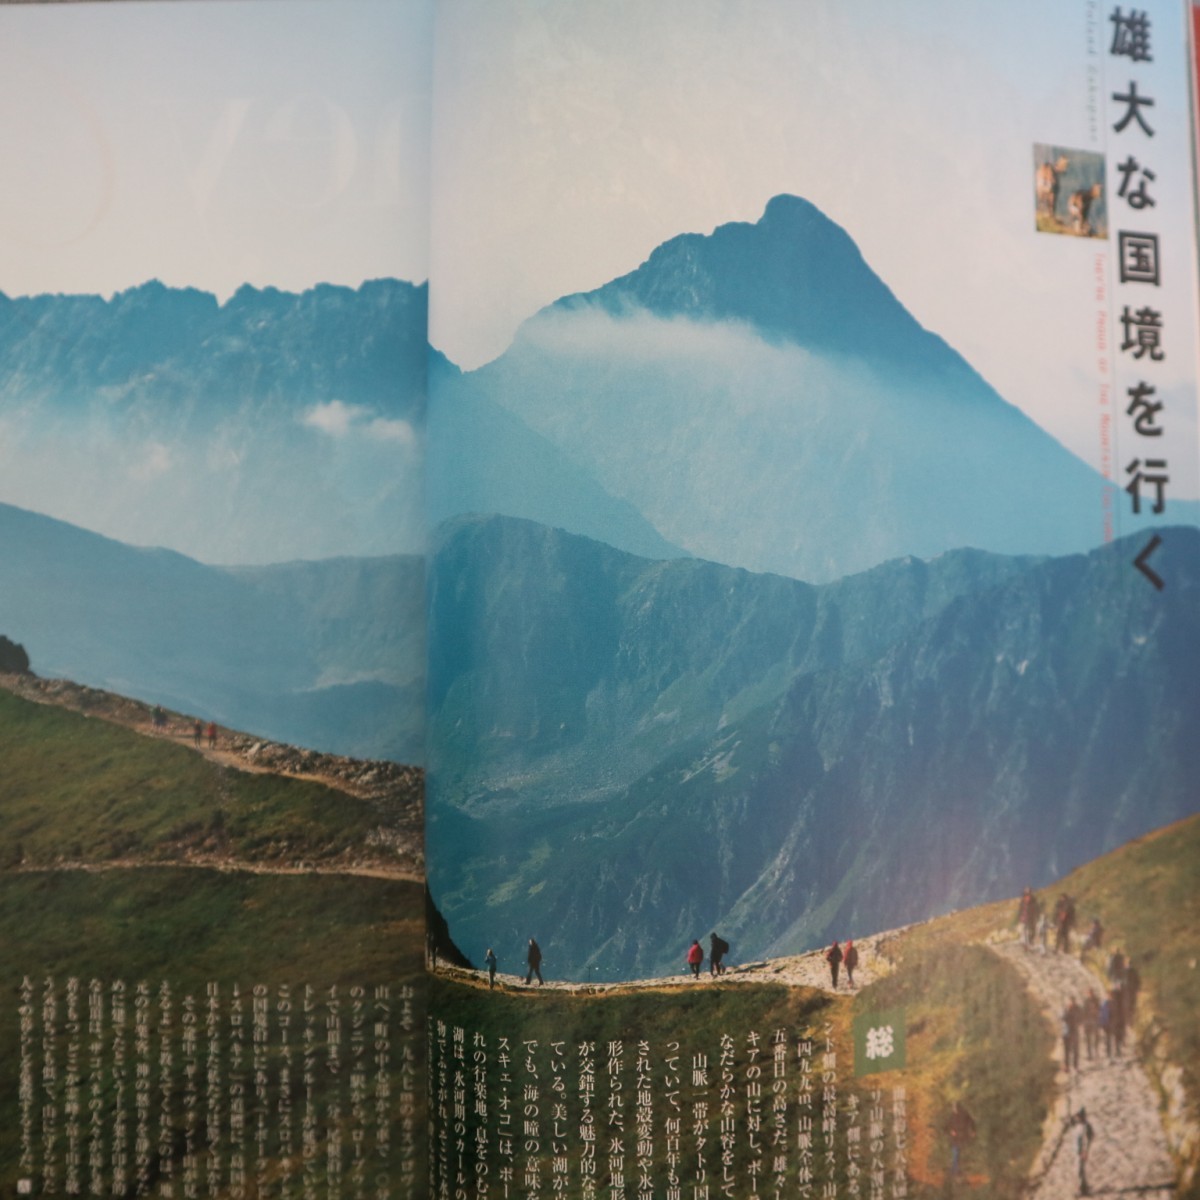  Special 2 51332 / JAL in-flight magazine AGORA[agola]2018 year 8*9 month .. number Poland : mountain .... culture . pride Kushiro city : forest . lake ... fishing evolution make flexible .